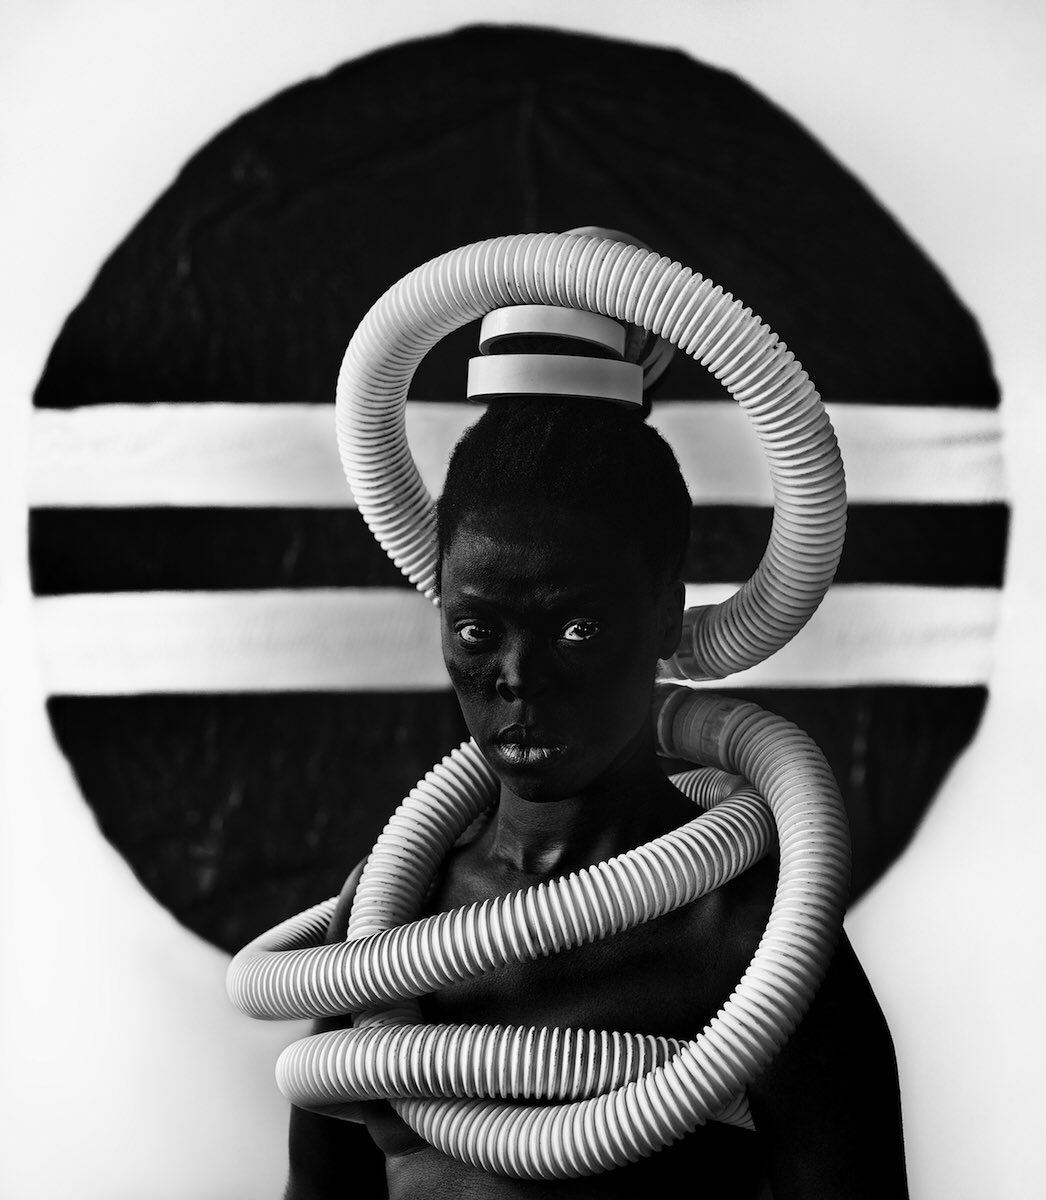 South African artist and visual activist working in photography Zanele Muholi, from her series Somnyama Ngonyama – Hail the Dark Lioness.